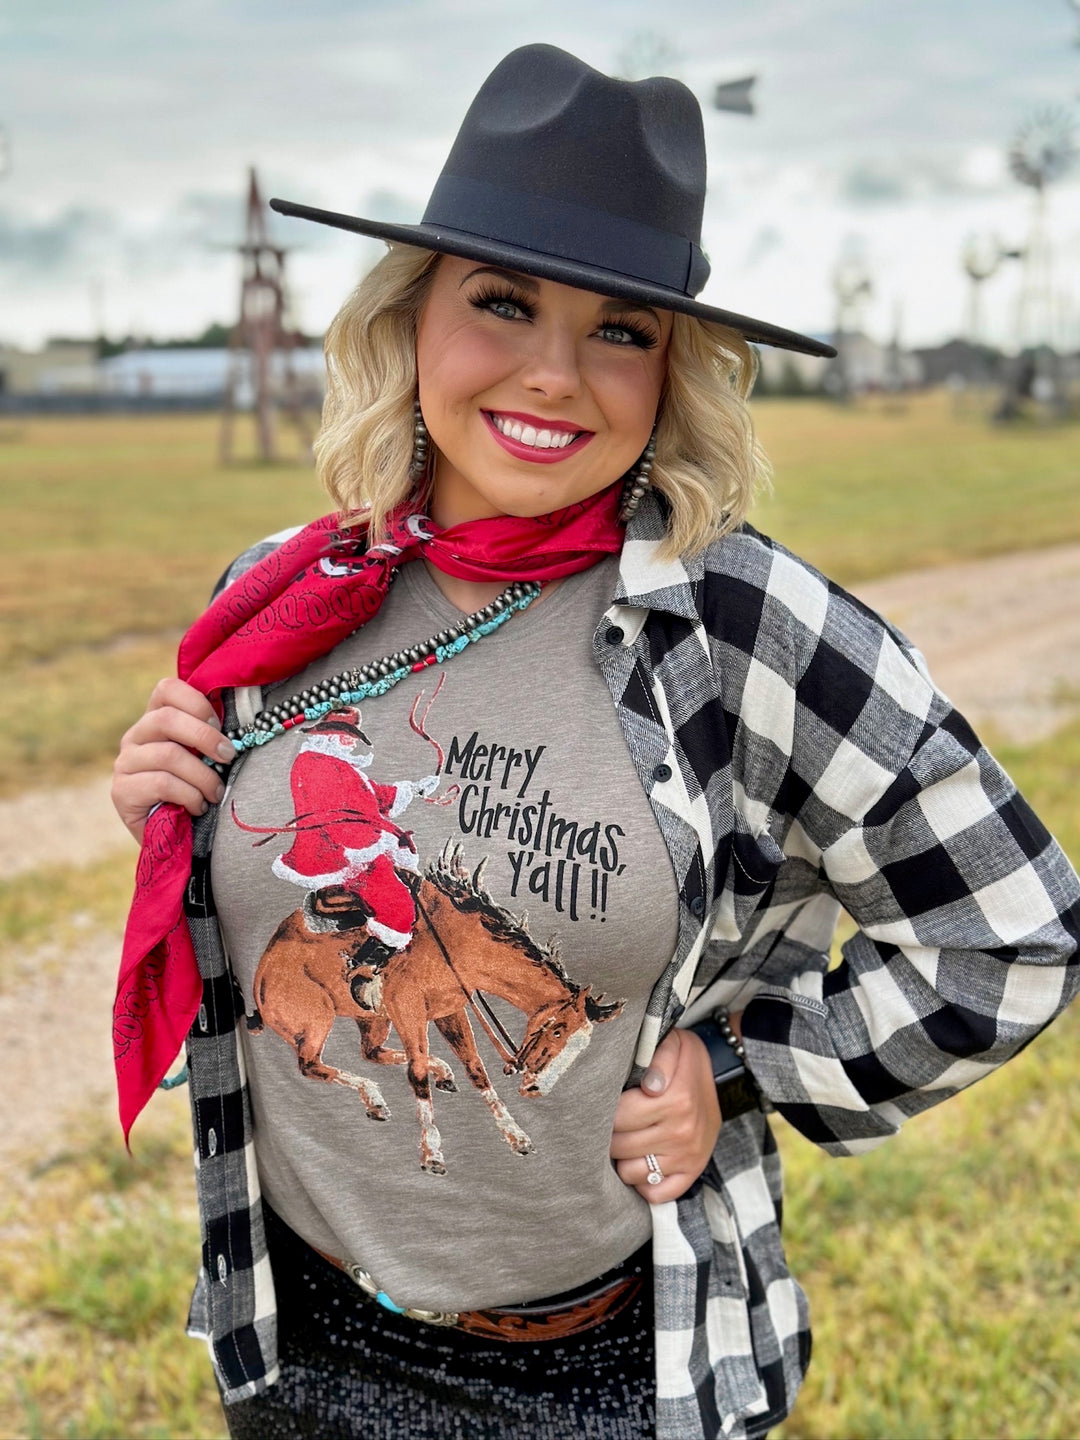 Merry Christmas Y'all Graphic Tee by Texas True Threads